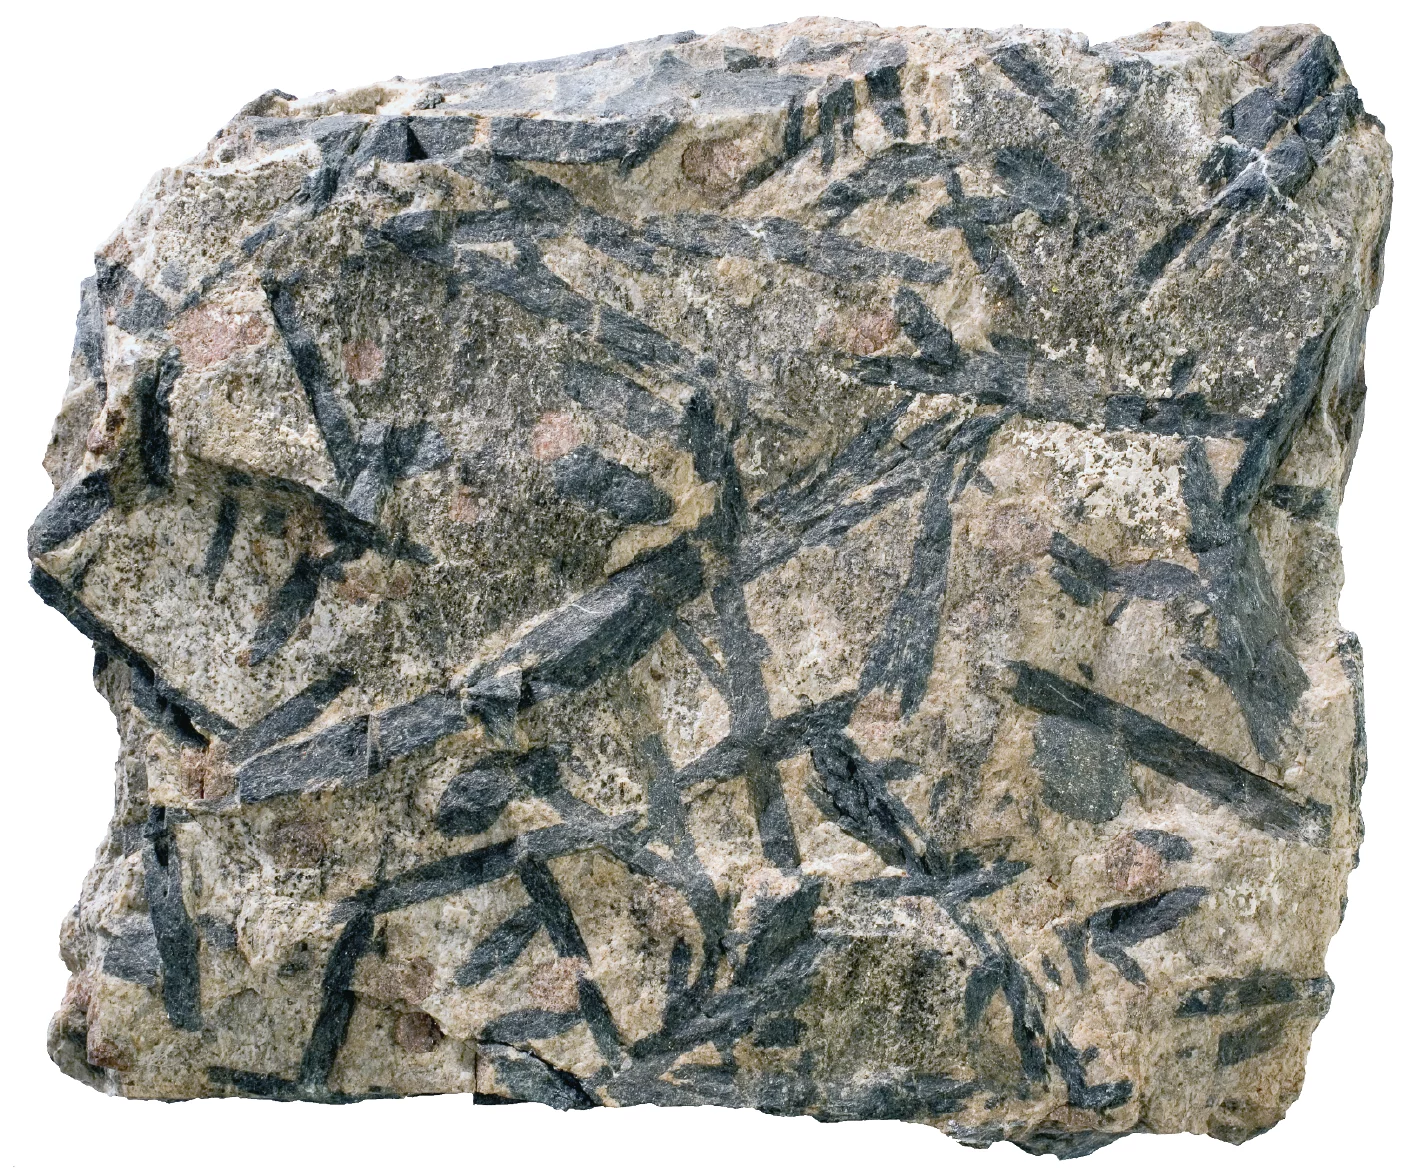 Hornblende-Garbenschiefer, Val Tremola (Canton Ticino). Photo: <a href="https://collections.erdw.ethz.ch" data-type="URL" data-id="https://collections.erdw.ethz.ch" target="_blank" rel="noreferrer noopener">Earth Science Collections of the Swiss Federal Institute of Technology Zürich</a>, Urs Gerber’ style=’width:100%’><figcaption></figcaption></figure><p><strong>Occurrence:</strong> Alps, crystalline basement beneath the Swiss Plateau and Jura Mountains<br /><strong>Origin:</strong> Metamorphosis of clay-rich parent rock<br /><strong>Main minerals:</strong> Mainly mica with a variety of other minerals<br /><strong>Appearance:</strong> Shiny, dark, thin-layered due to mineral orientation<br /><strong>Properties:</strong> Easily fissile along smooth cleavage planes<br /><strong>Uses:</strong> Floor and façade tiles, roofing</p><hr class="wp-block-separator" /><h4 class="wp-block-custom-heading">Marble</h4><figure class=